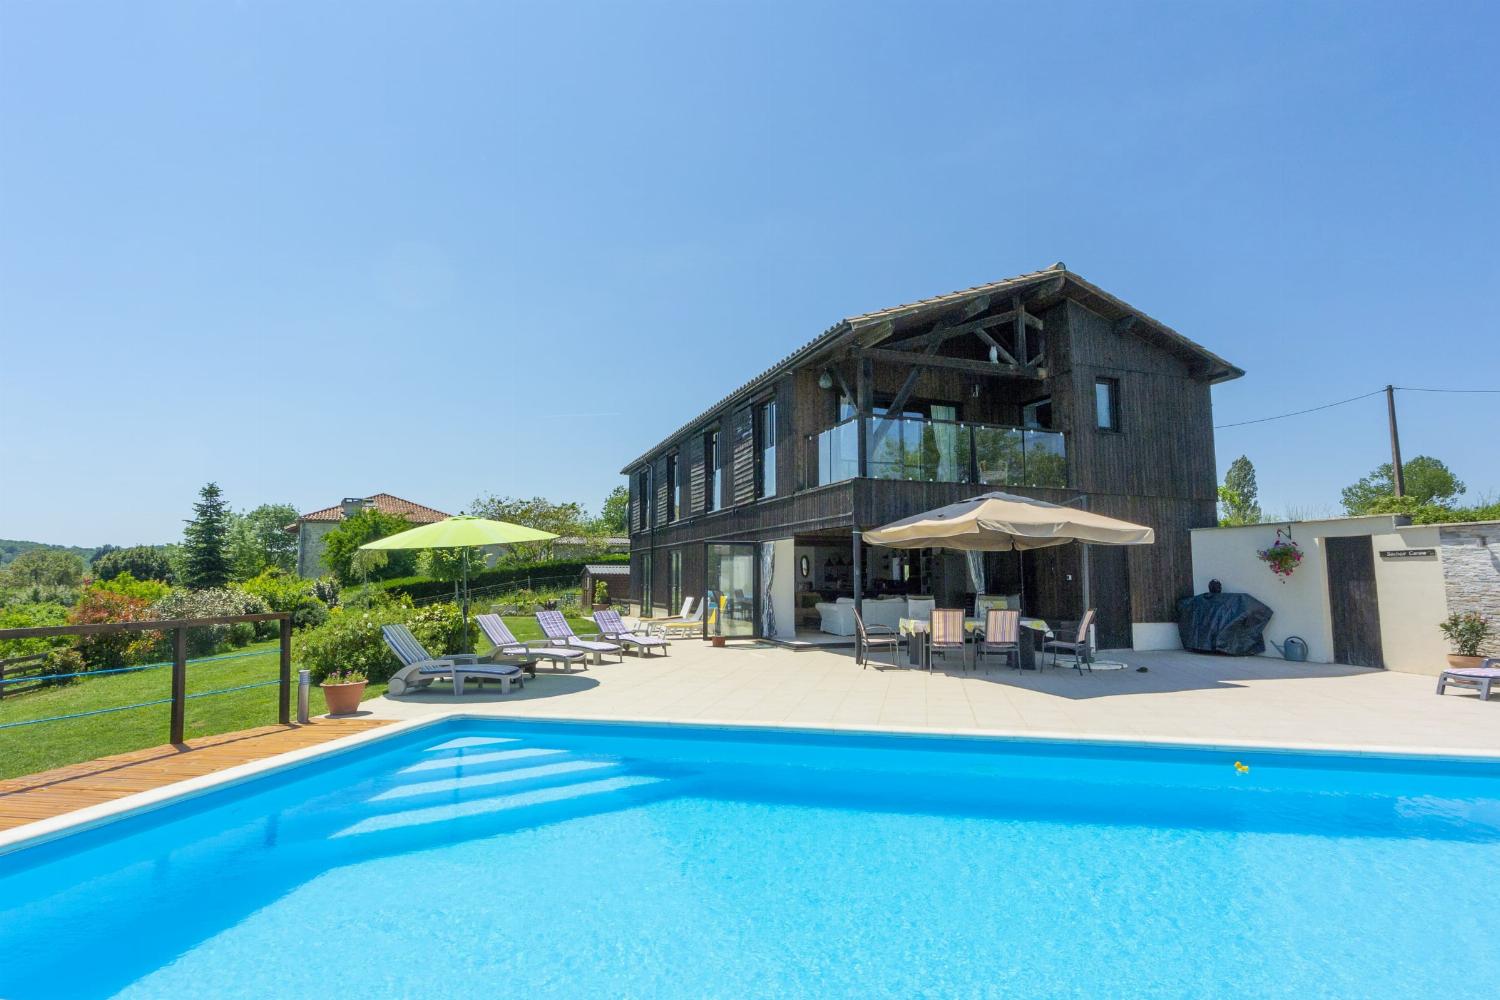 Rental home in Dordogne with private pool